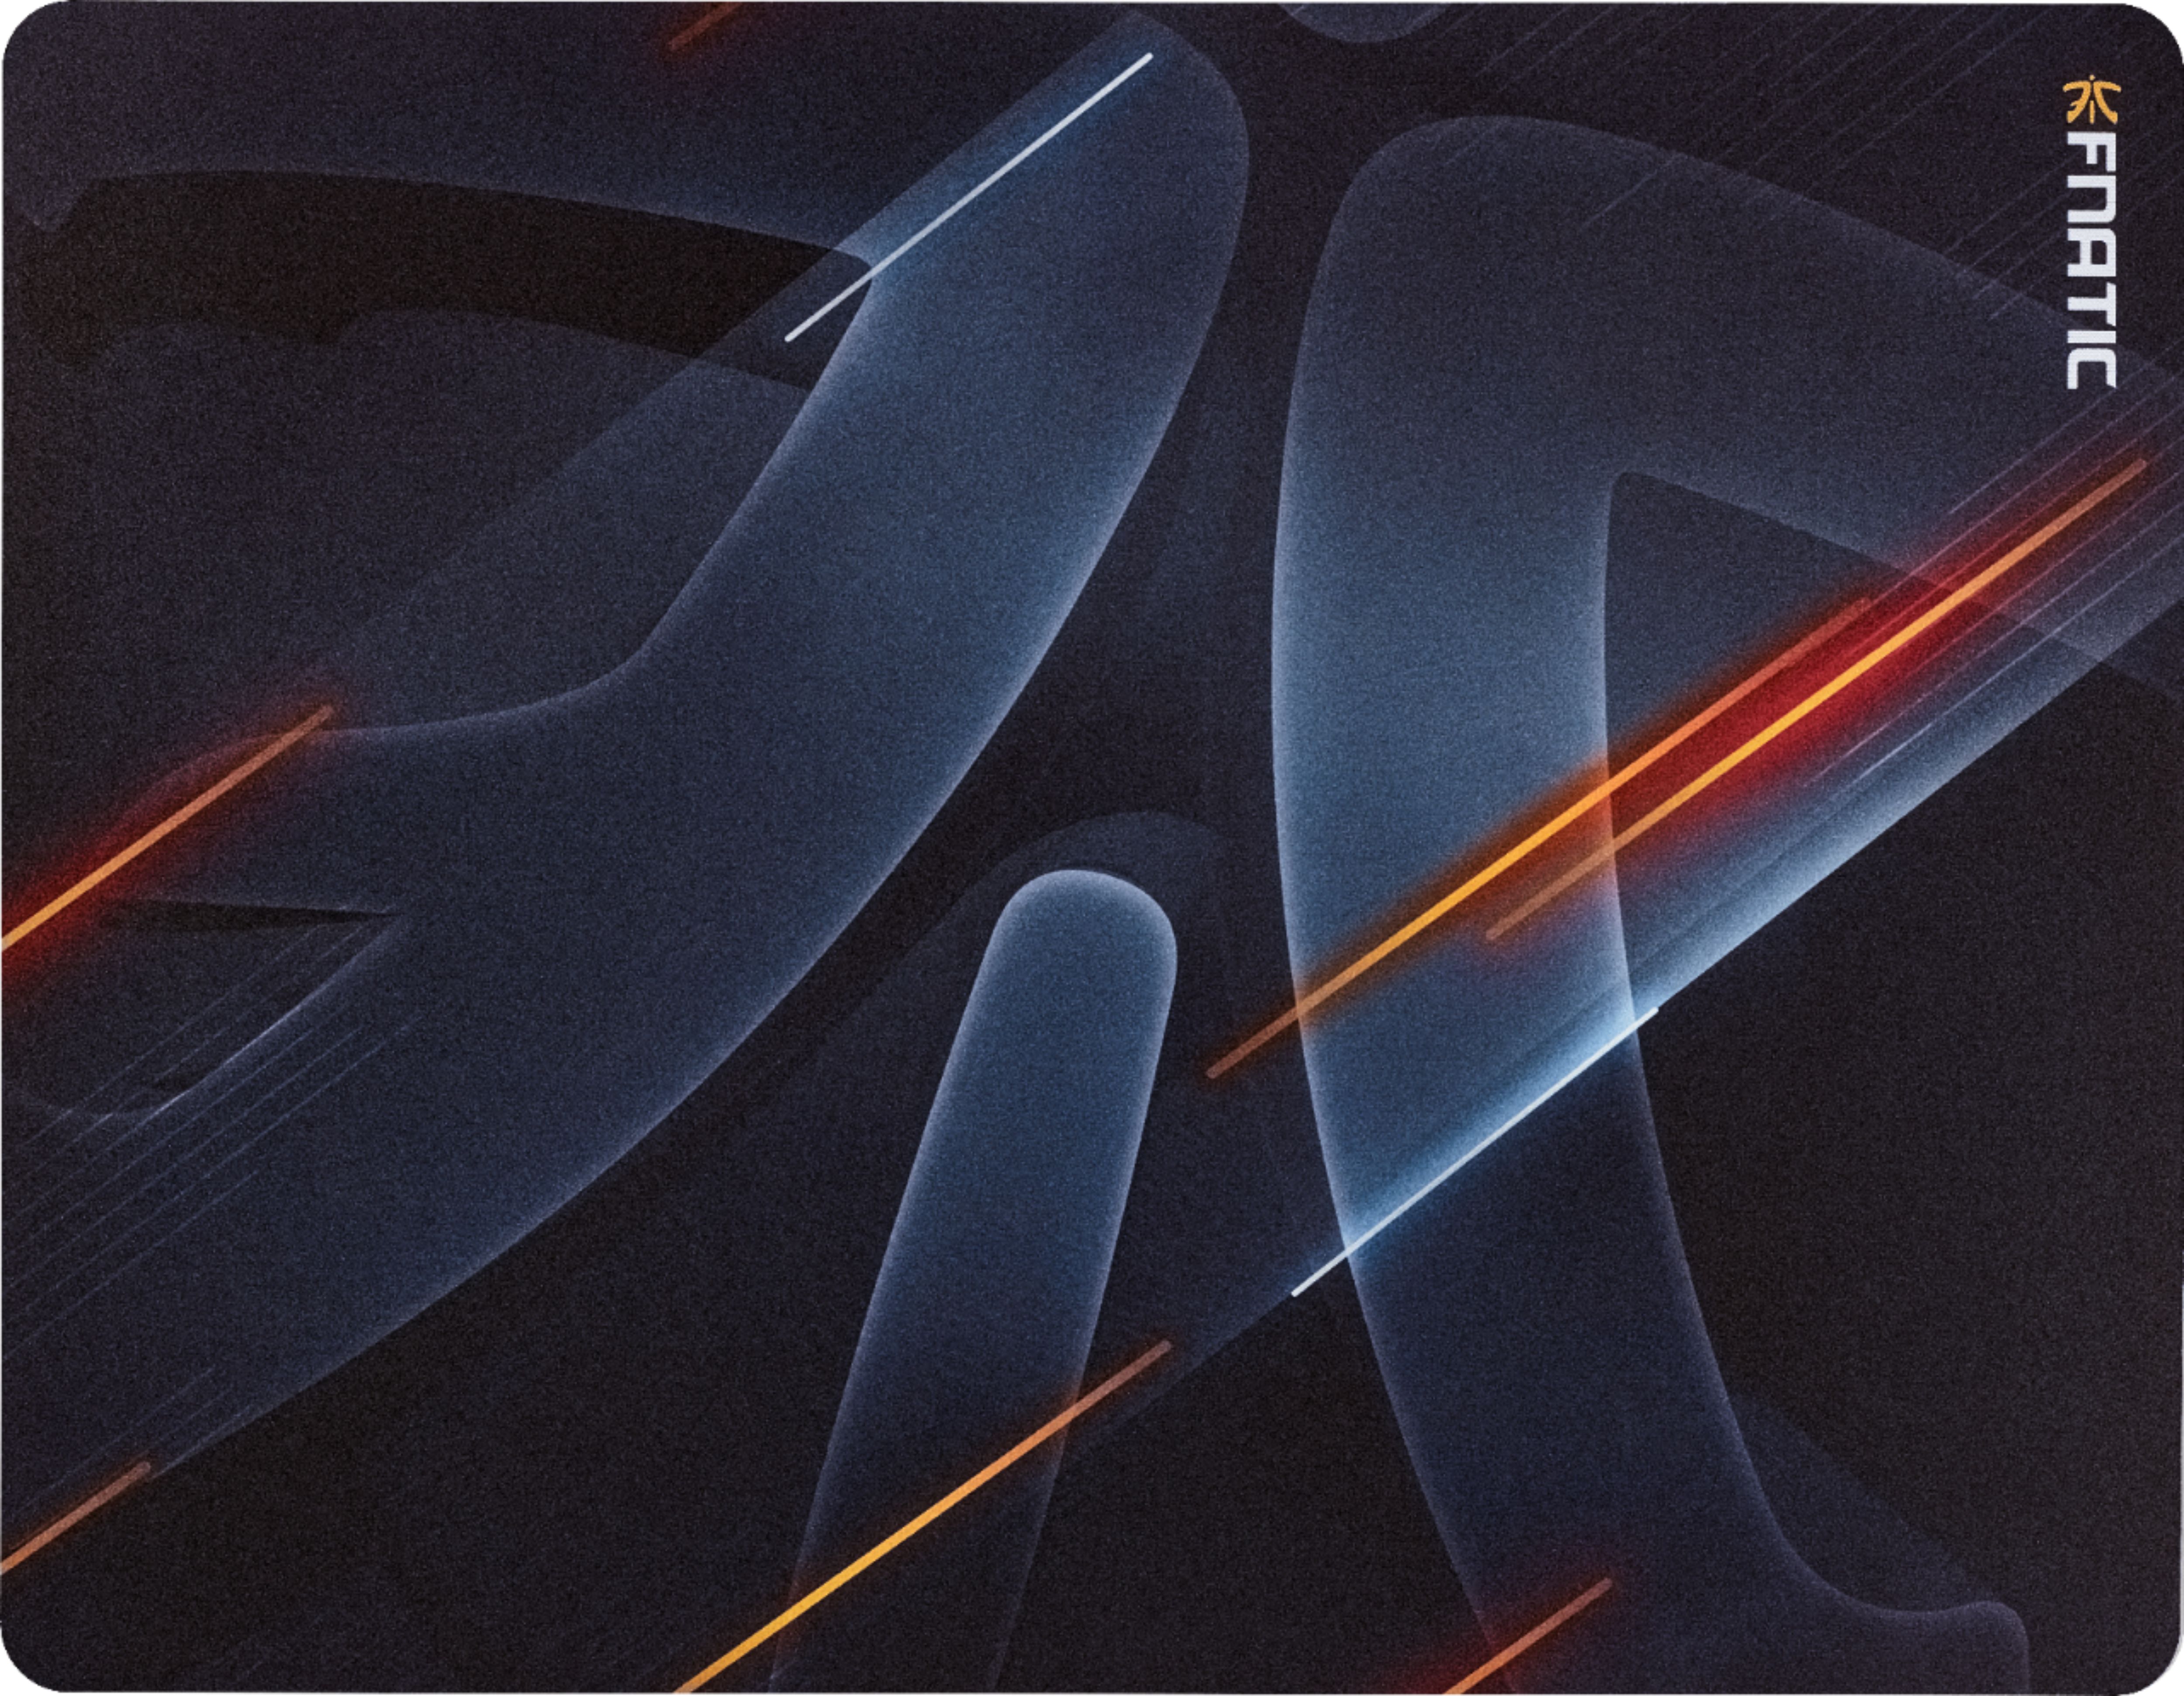 Fnatic - Focus 2 Large Mouse Pad - Neon